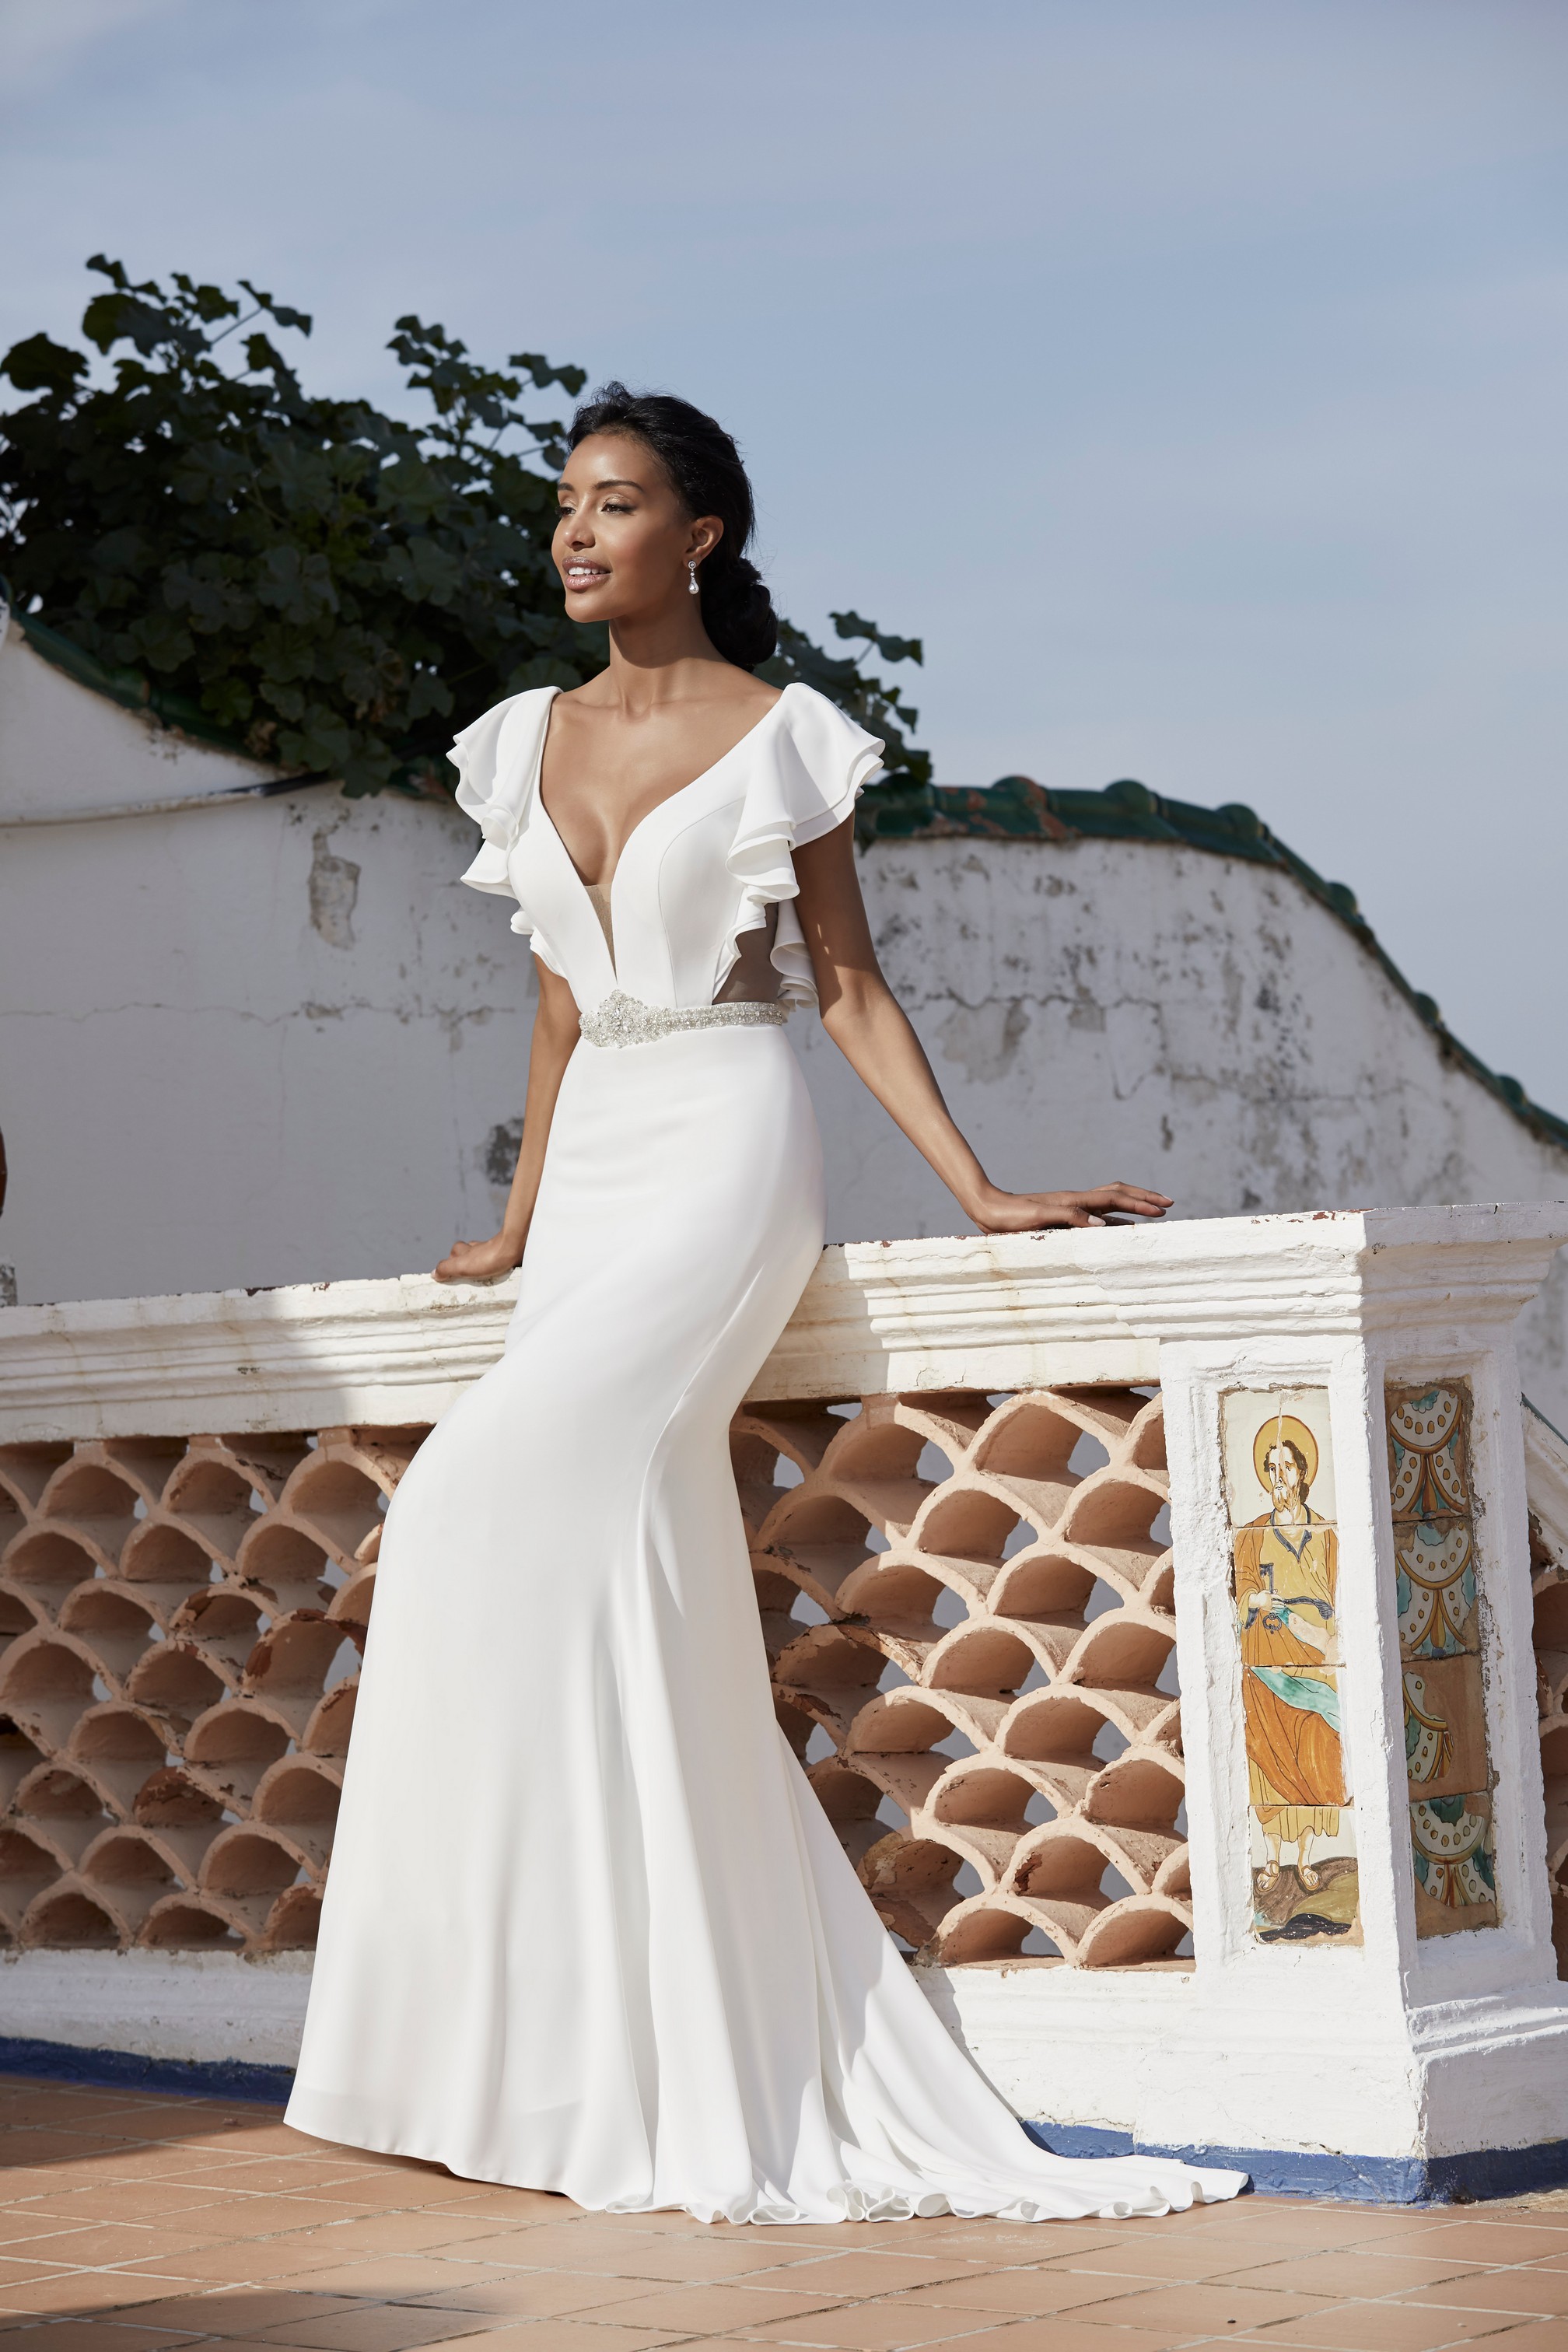 A black model stood on a Spanish terrace in Victoria Jane style 18553, a plain crepe destination wedding gown with a plunging illusion neckline and ruffle cap sleeves 